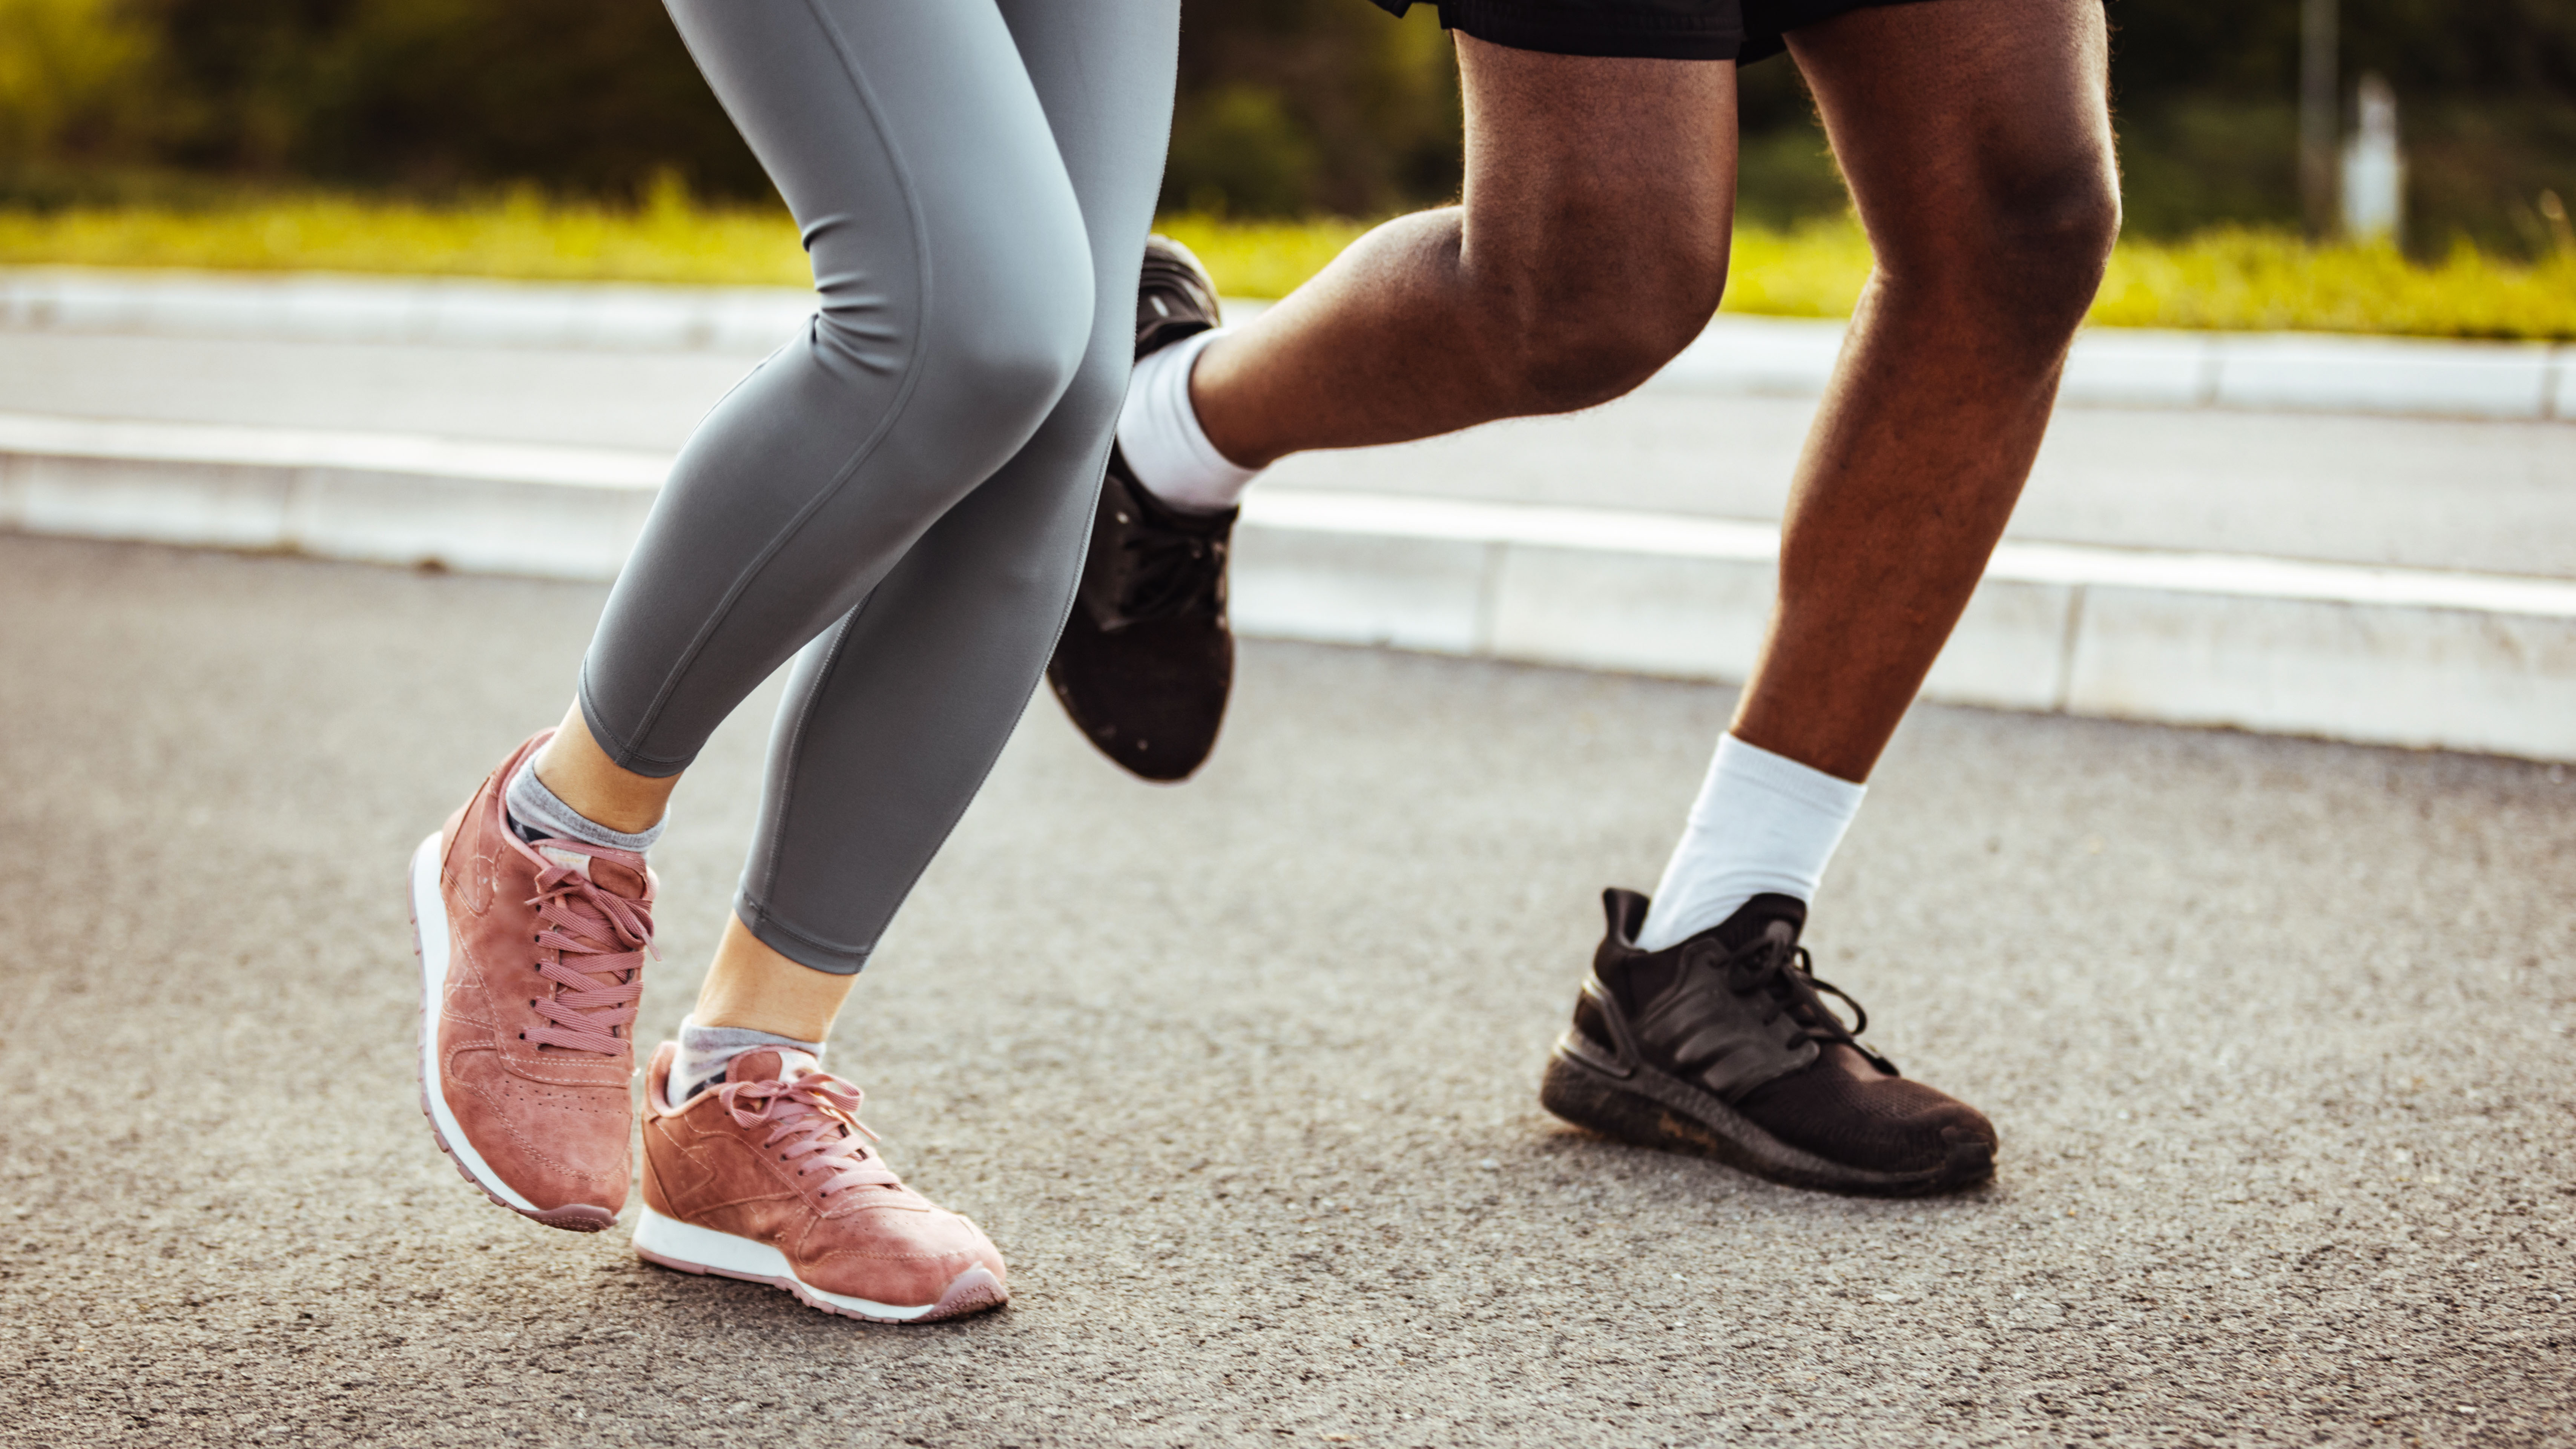 Two people in running shoes